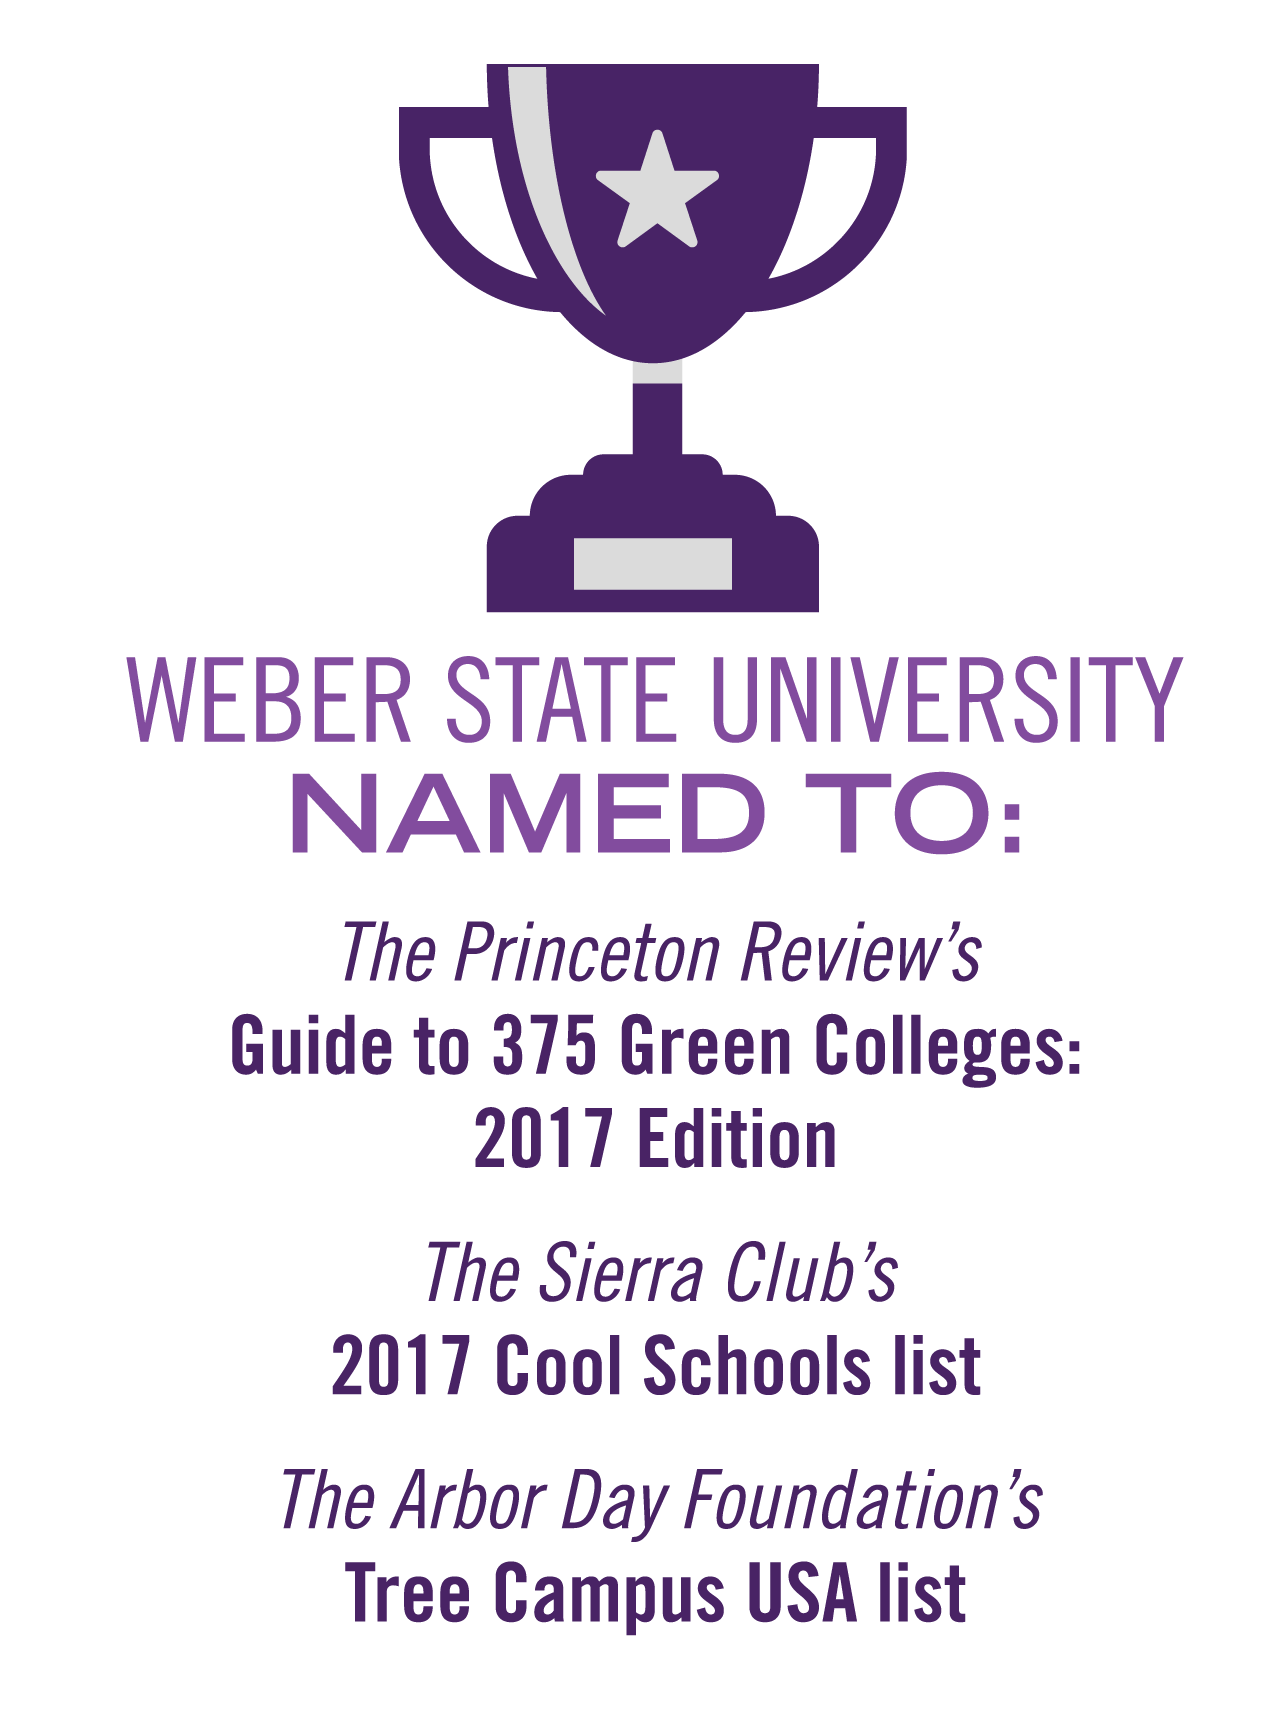 image text: weber state named to the princeton review's guide to 375 green colleges 2017 edition, the sierra club's 2017 cool schools list, the arbor day foundation's three campus usa list.